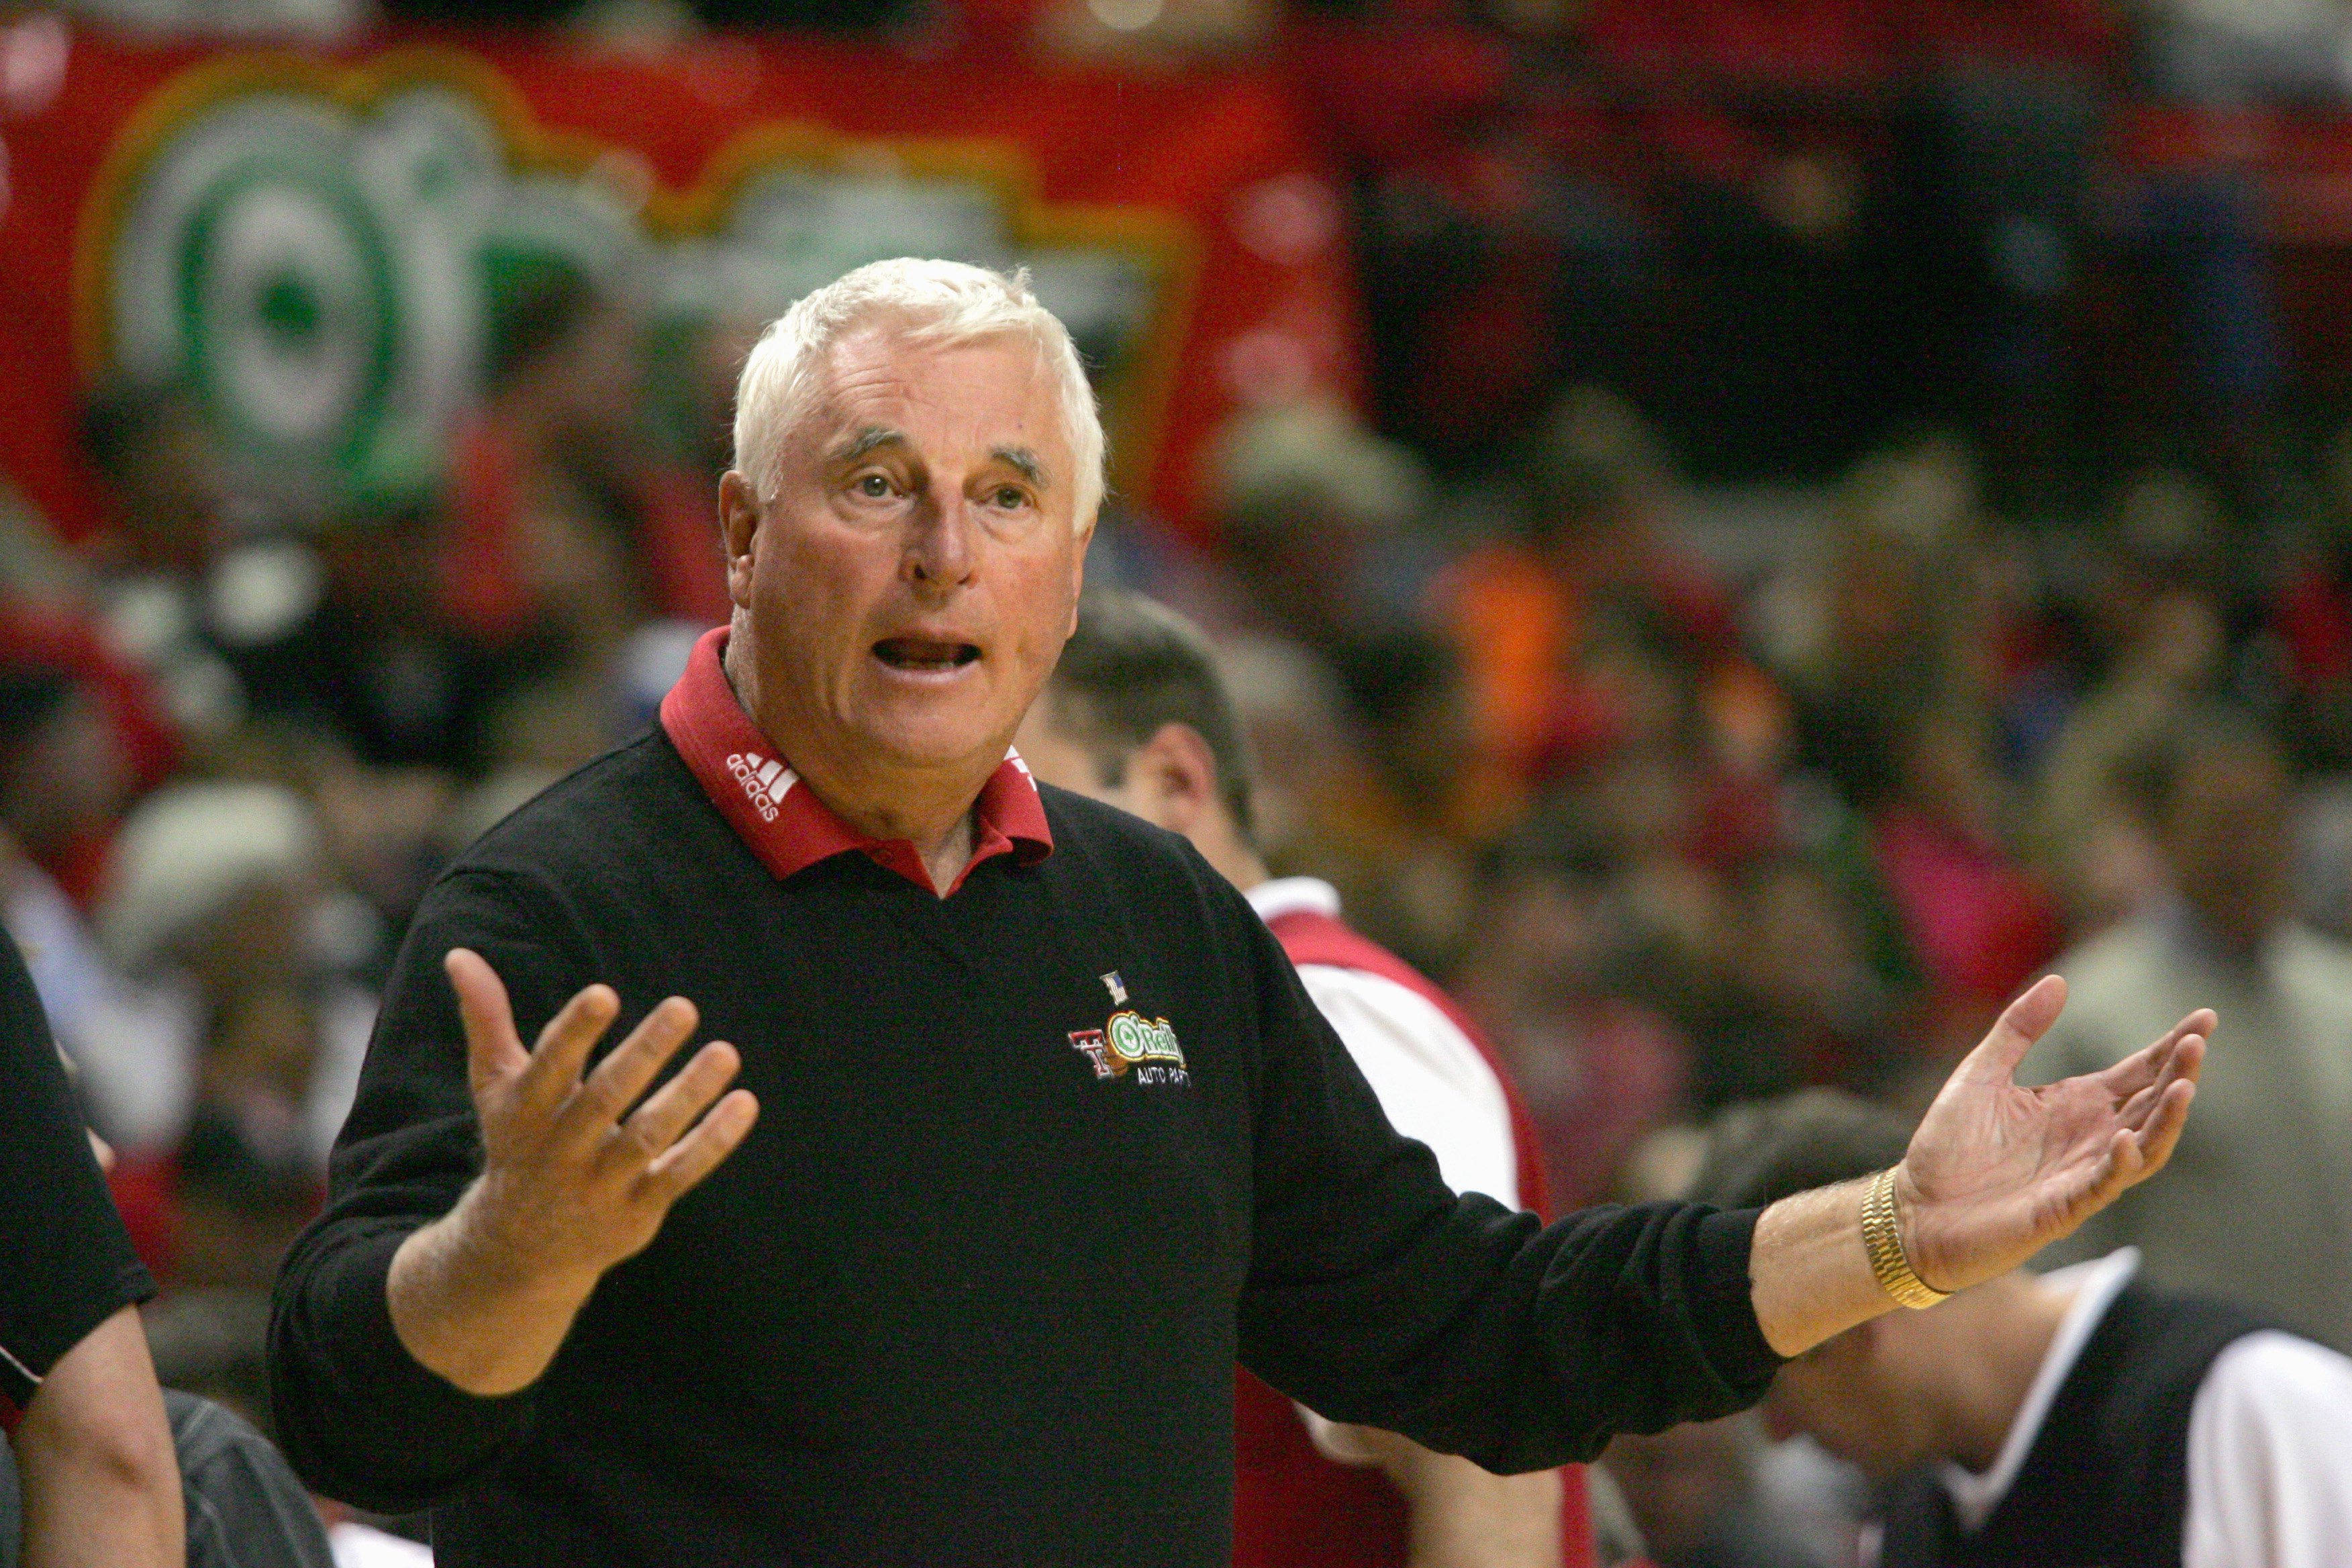 Bobby Knight once tried to get after Michael Jordan during the 1984 Olympics.